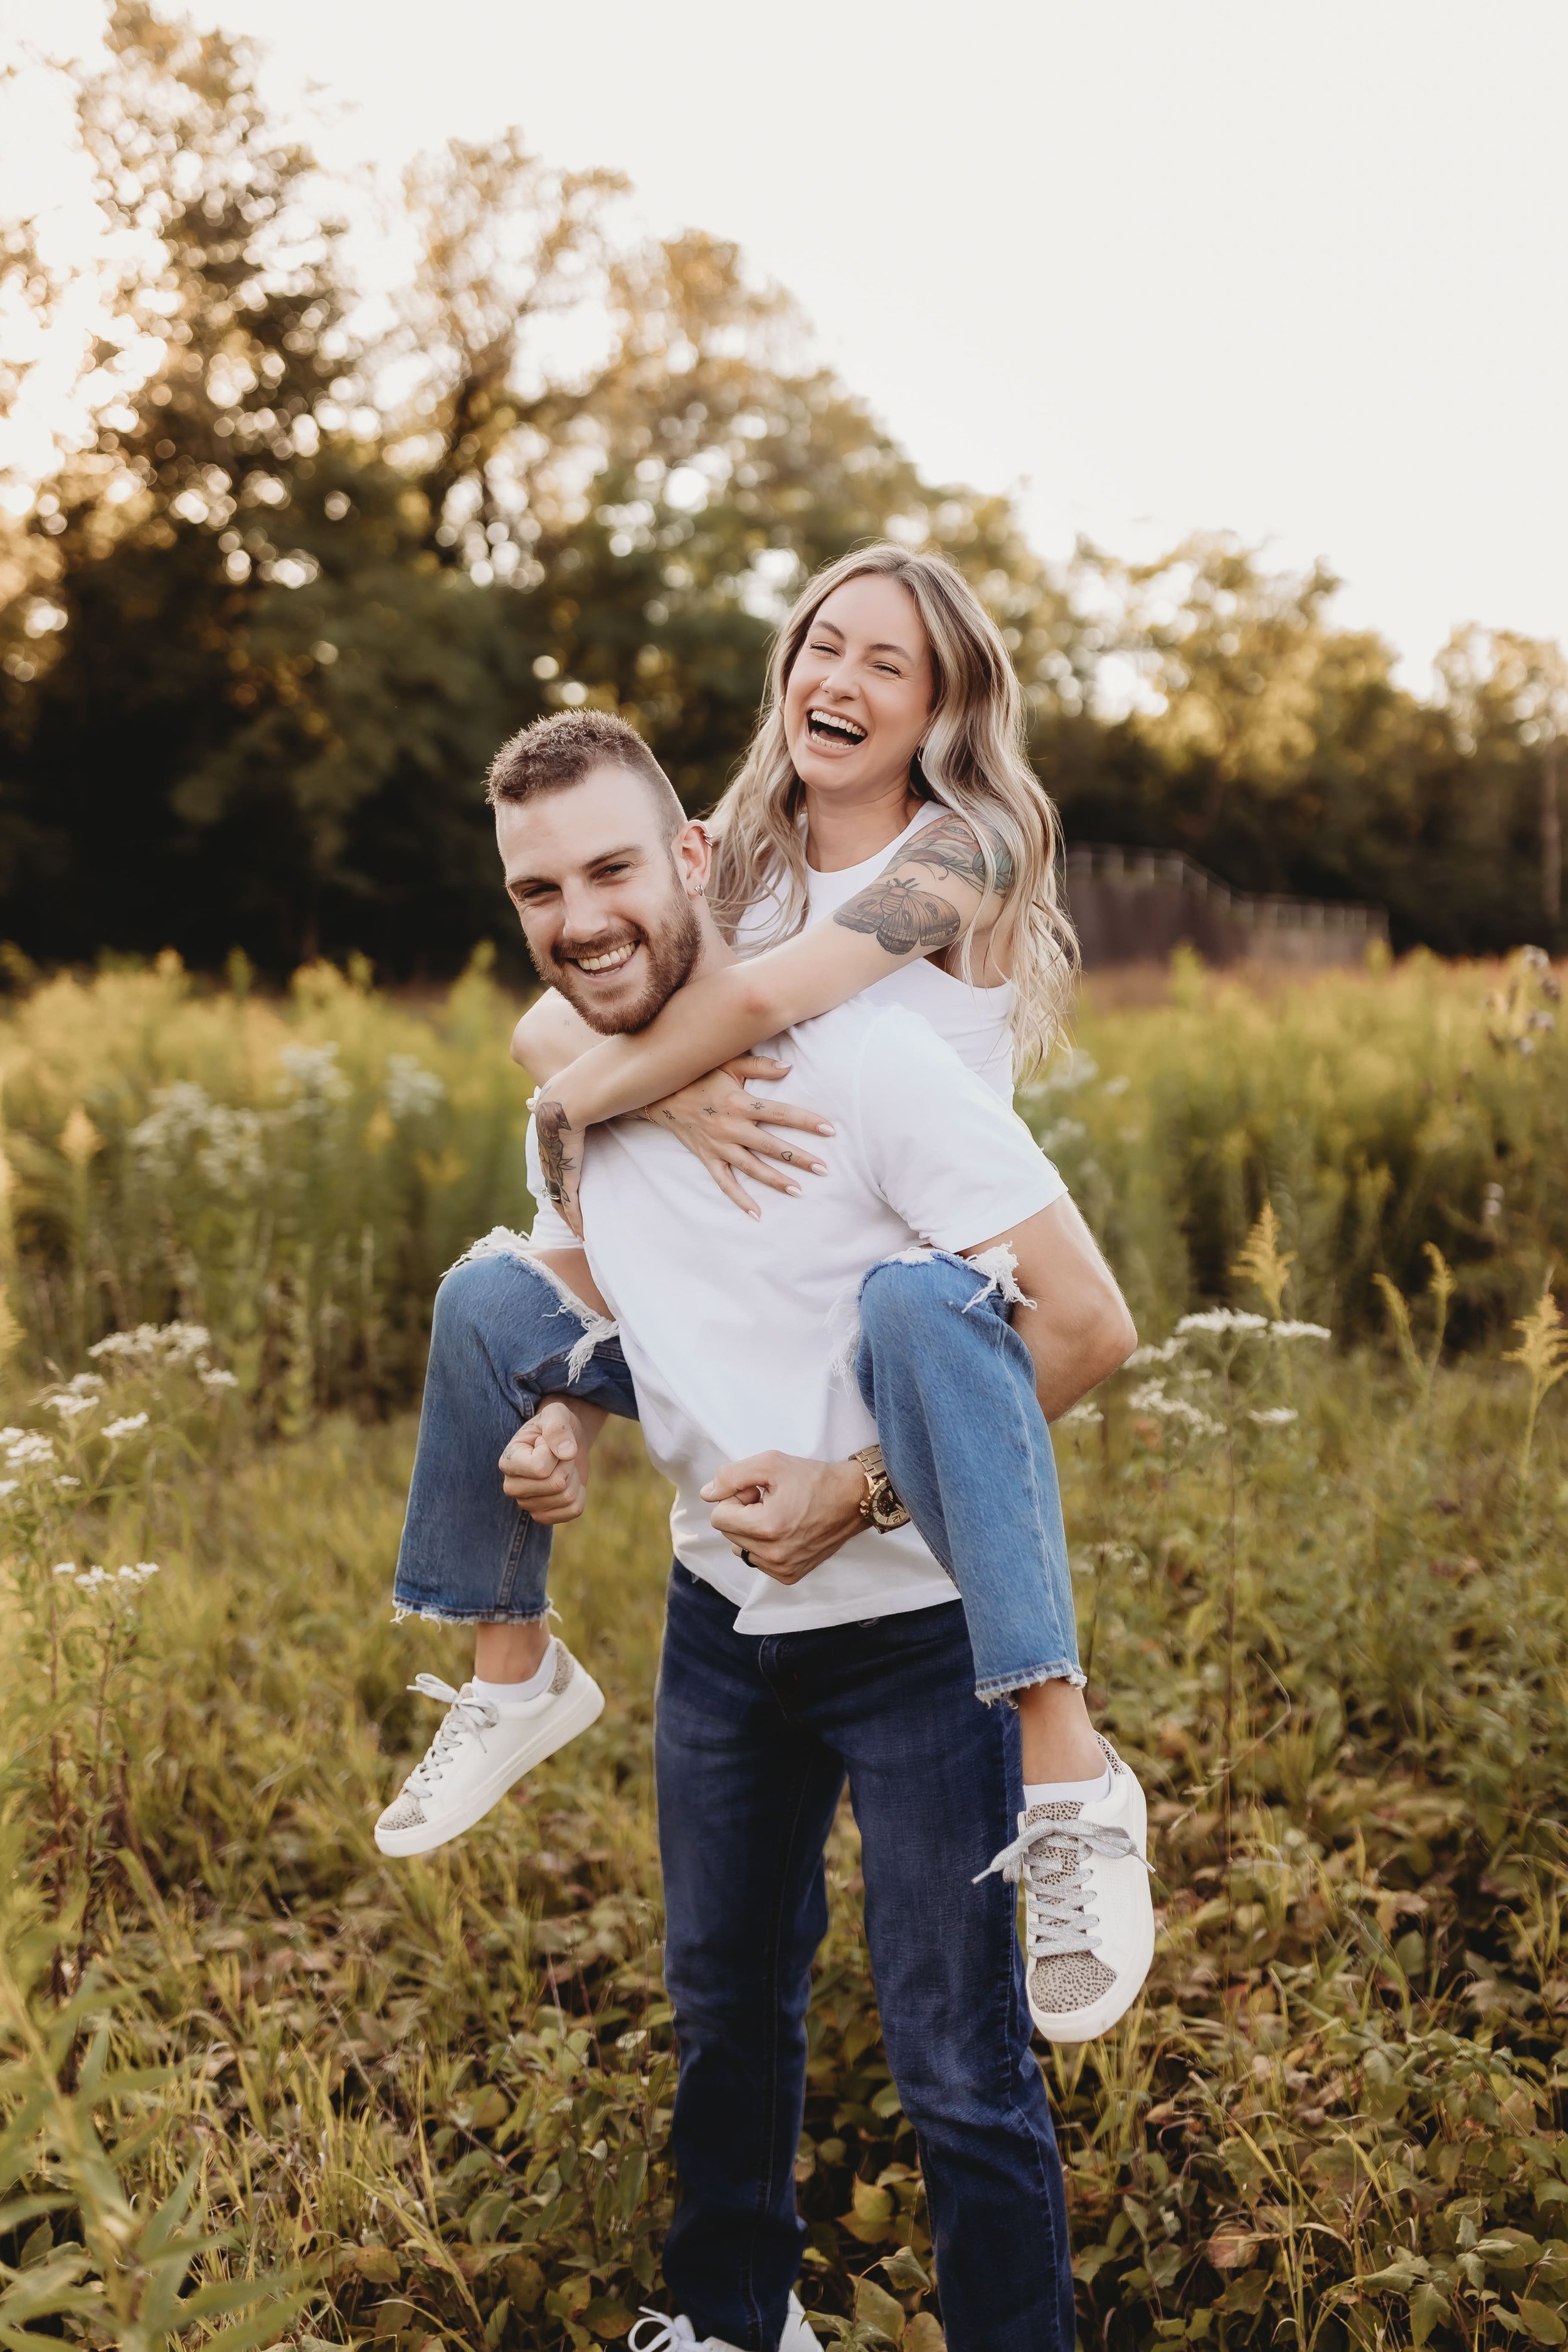 Simple couple pose | Couple posing, Couple photography poses, Poses